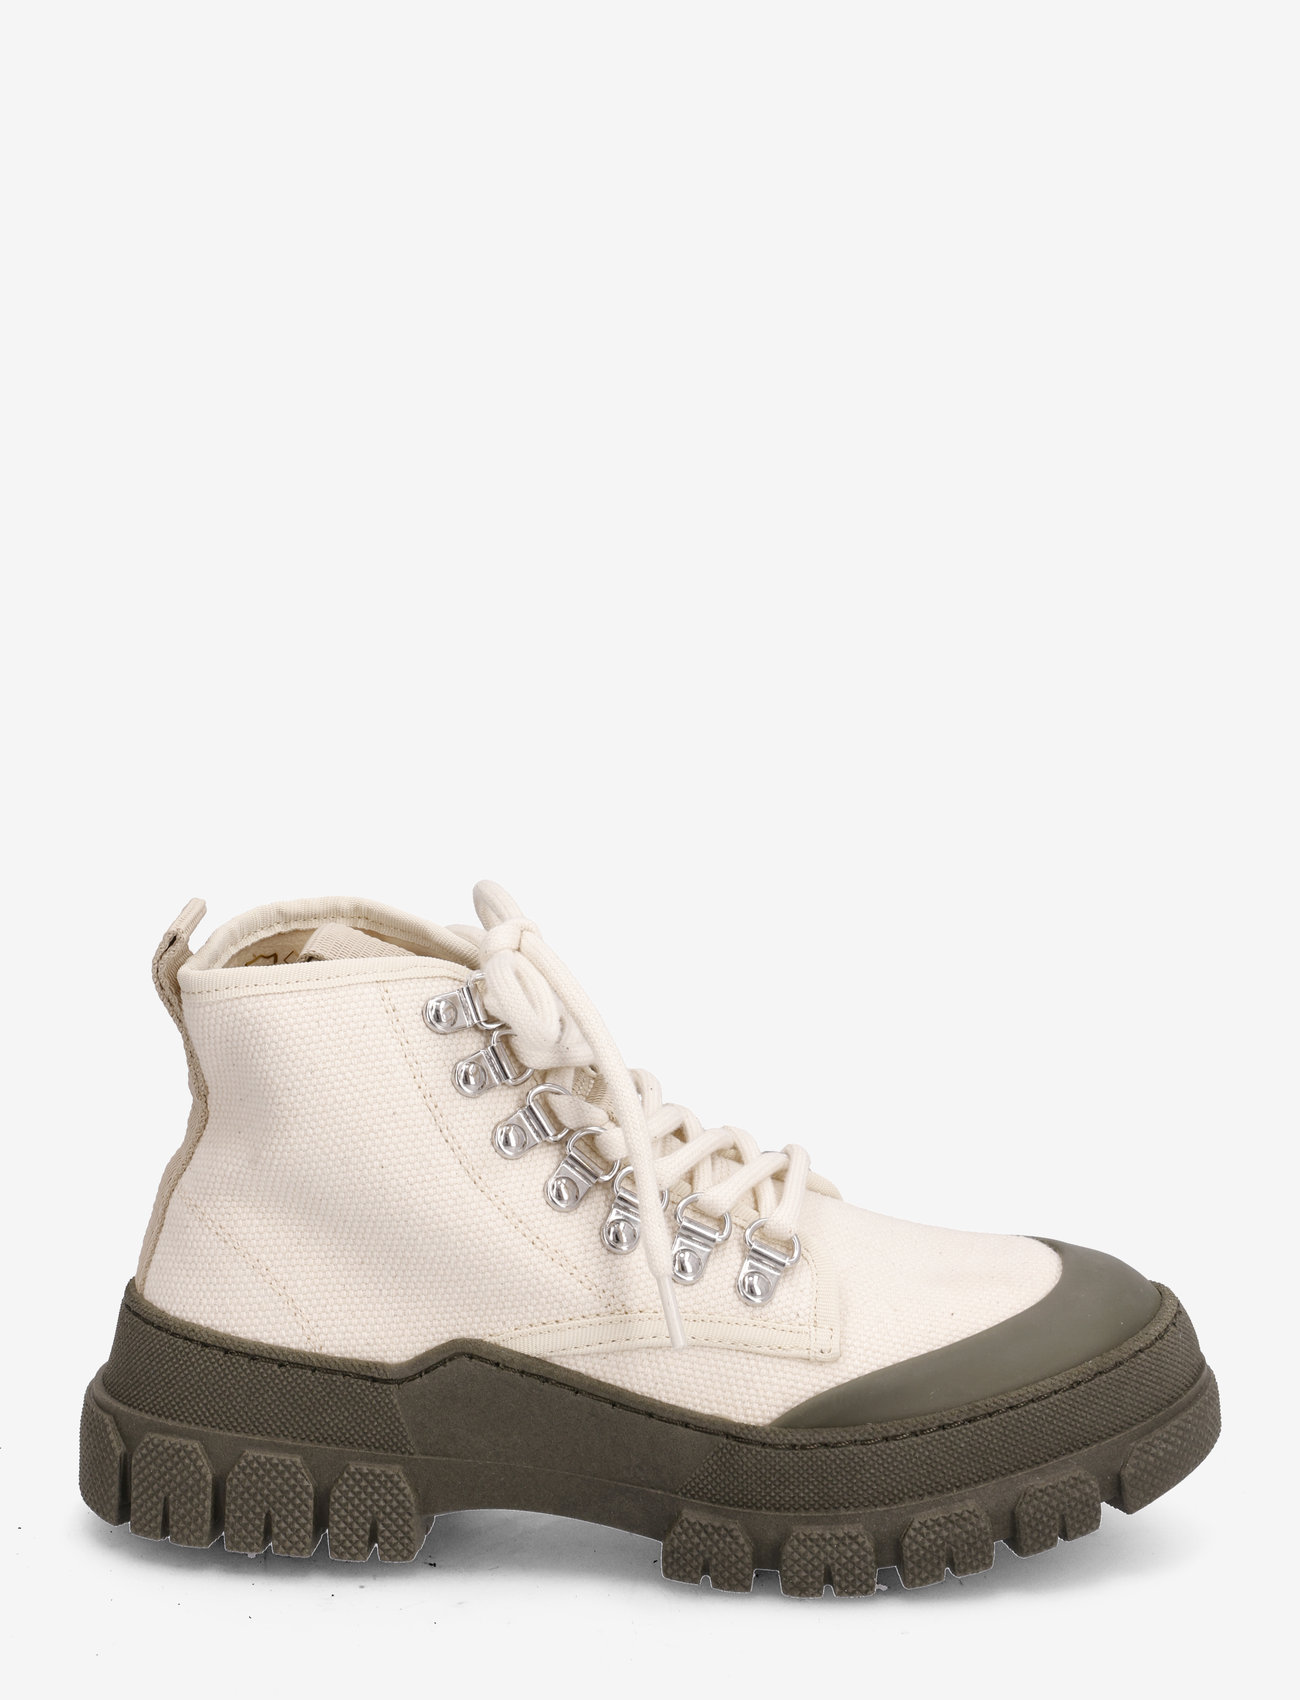 Garment Project - Twig High - Off White / Army - laced boots - off white - 1